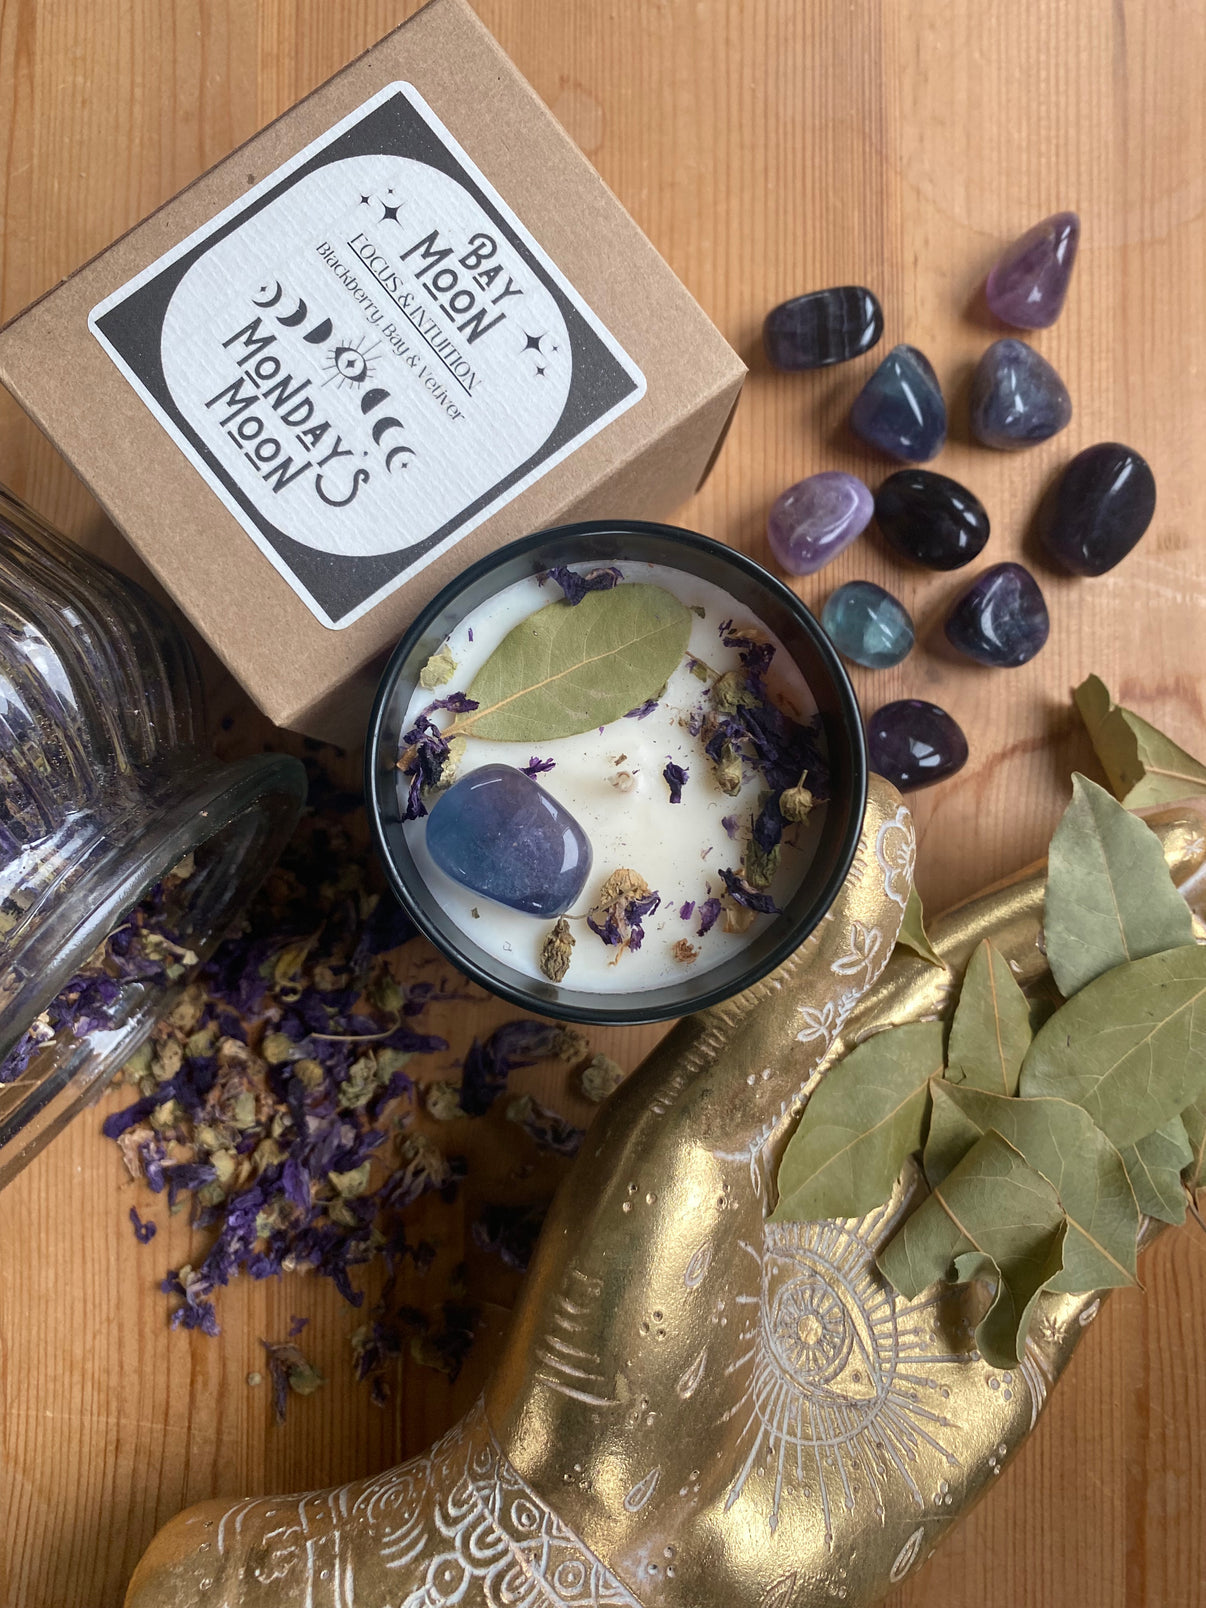 Bay Moon 🌙 scented Manifestation Candle infused with crystals & botanicals